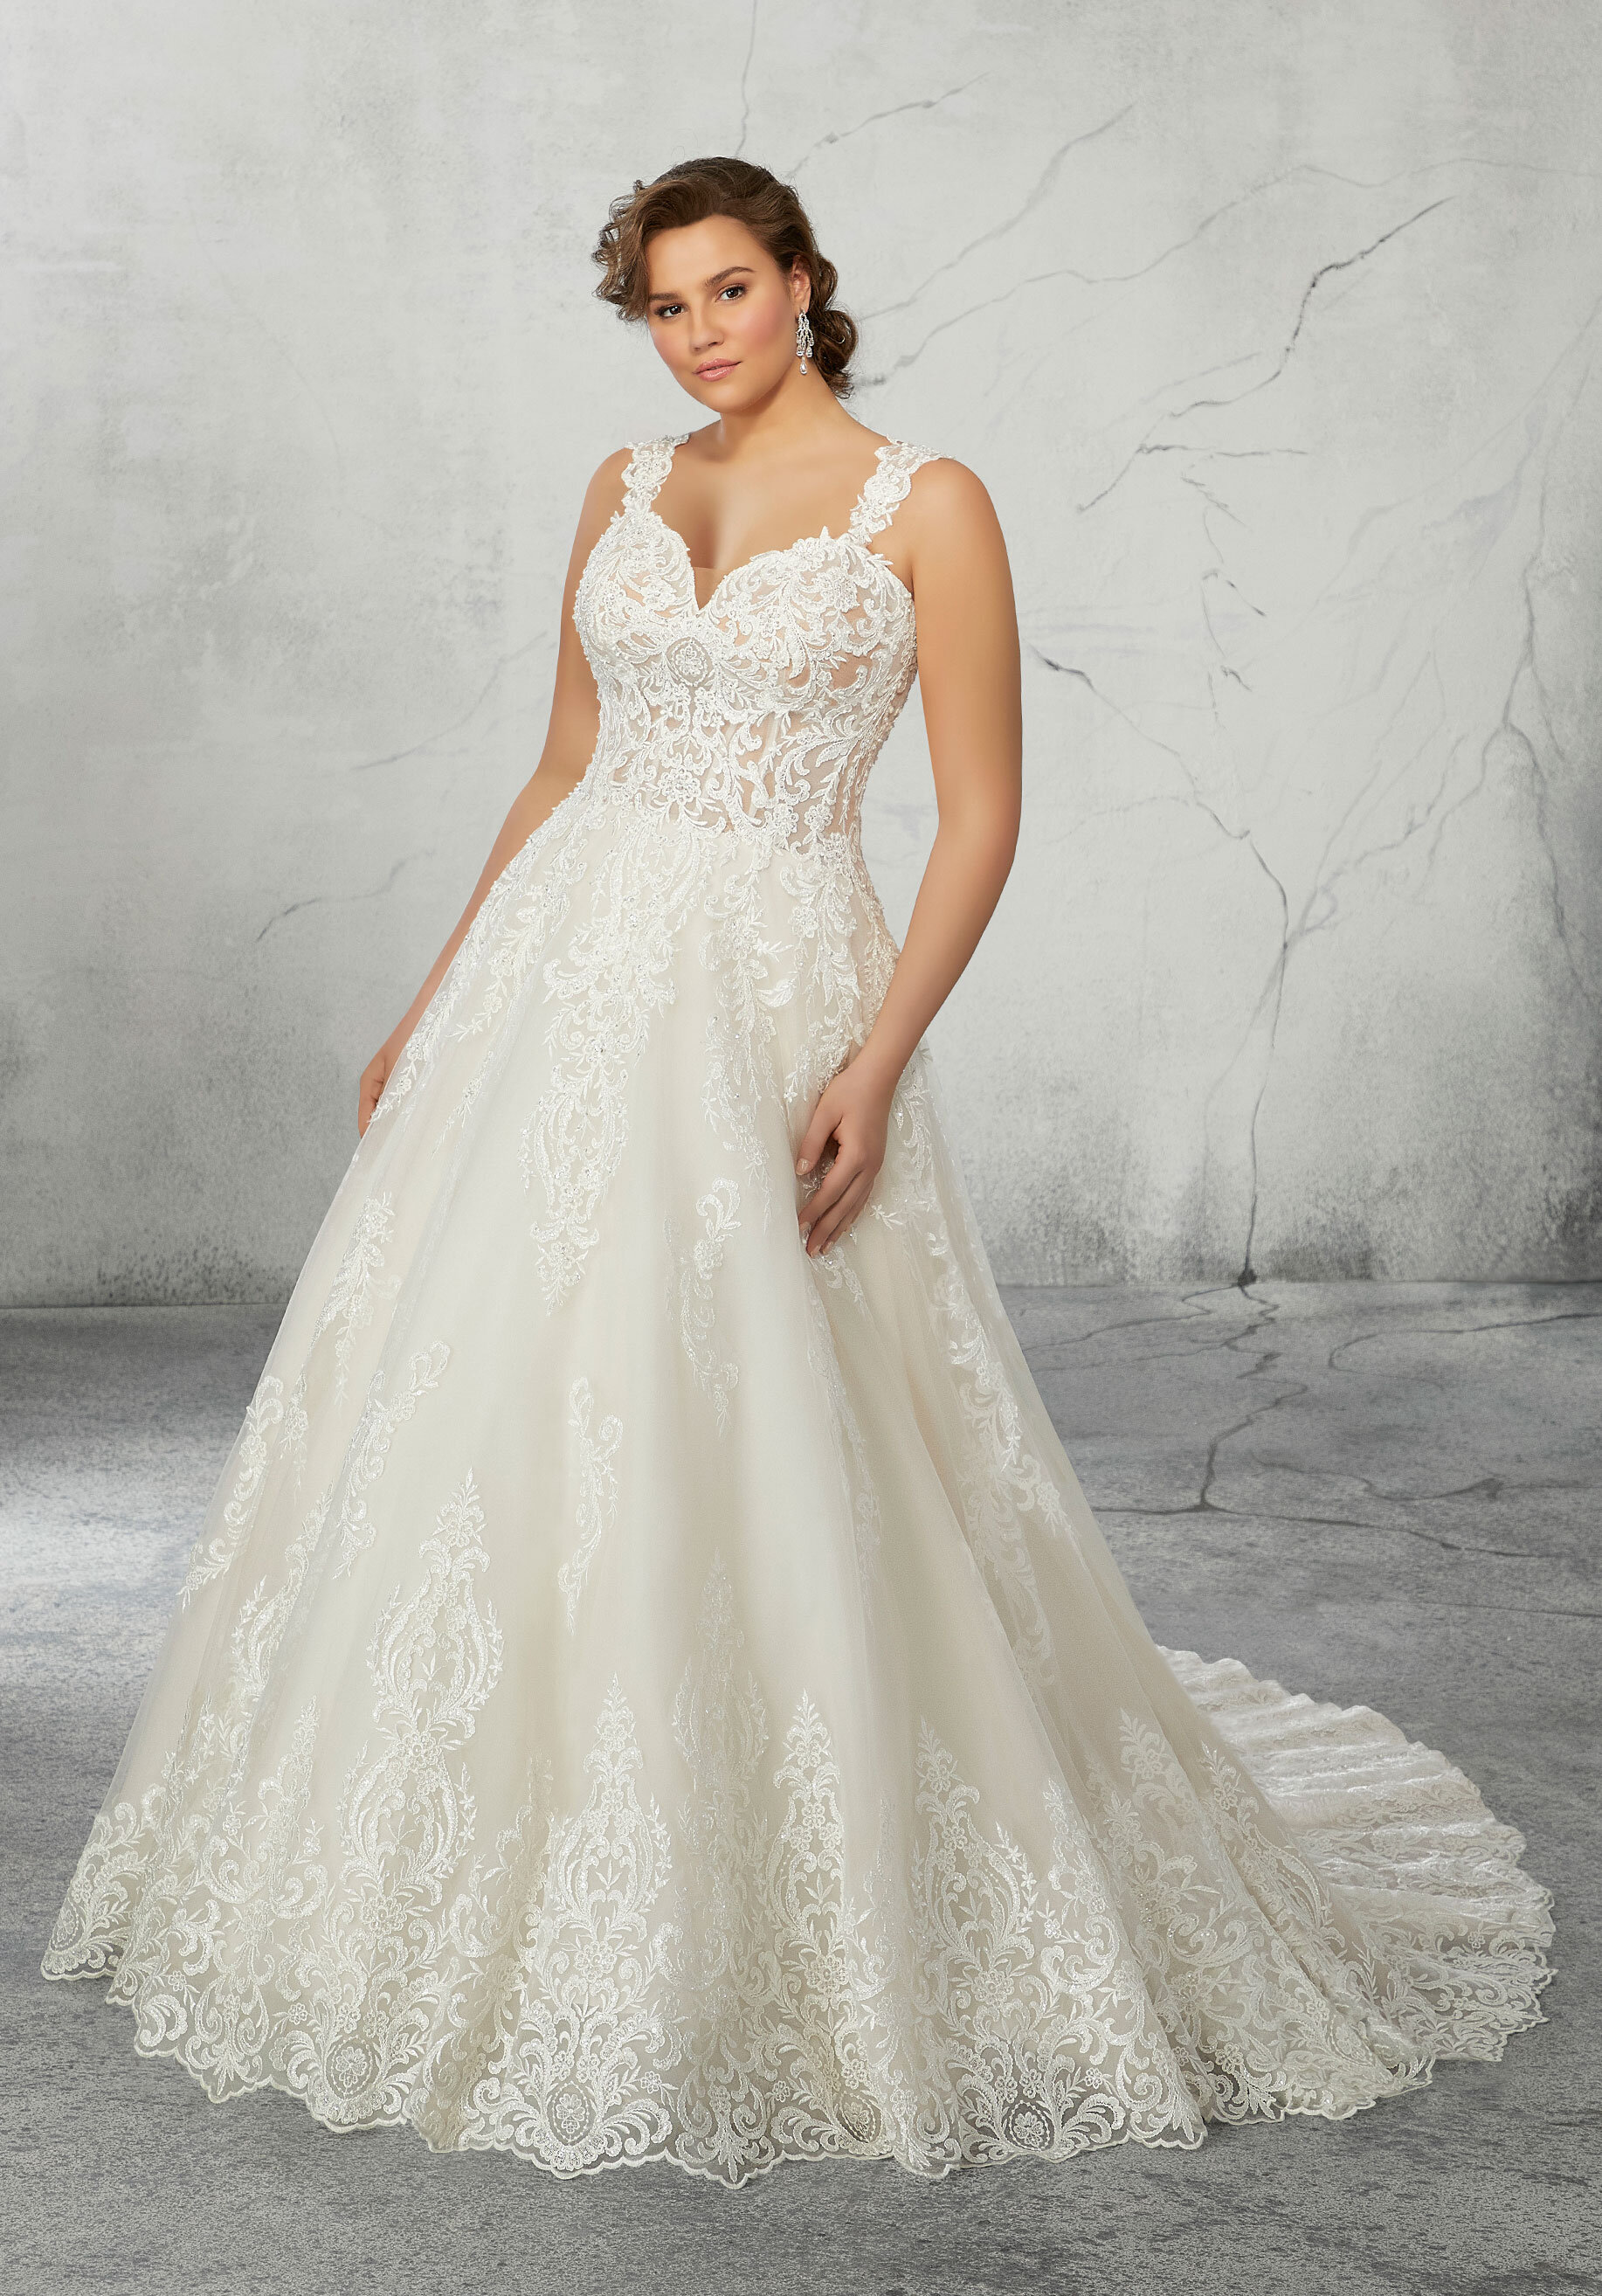 Brides-by-Young-Curvy-Plus-Size-Bridal-Chicago-Illinois-Indianapolis-Indiana-New-Jersey-Wedding-Dress-Morilee-3272-Rhonda-Front.jpg